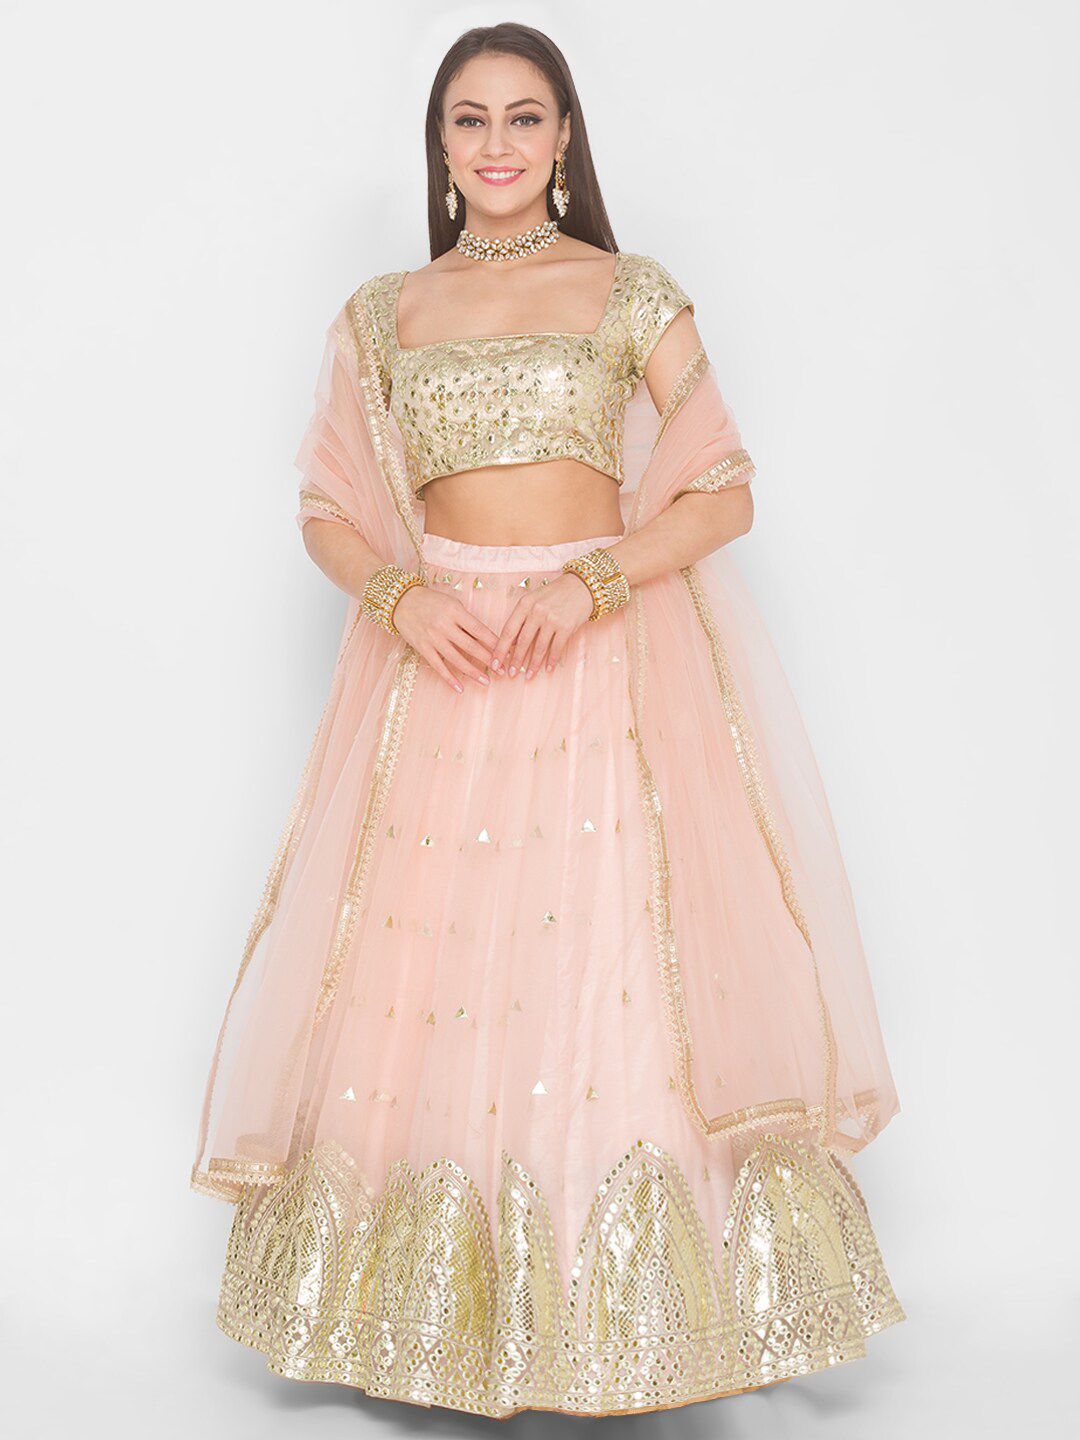 6Y COLLECTIVE Peach-Coloured & Gold-Toned Embellished Mirror Work Semi-Stitched Lehenga & Unstitched Blouse Price in India